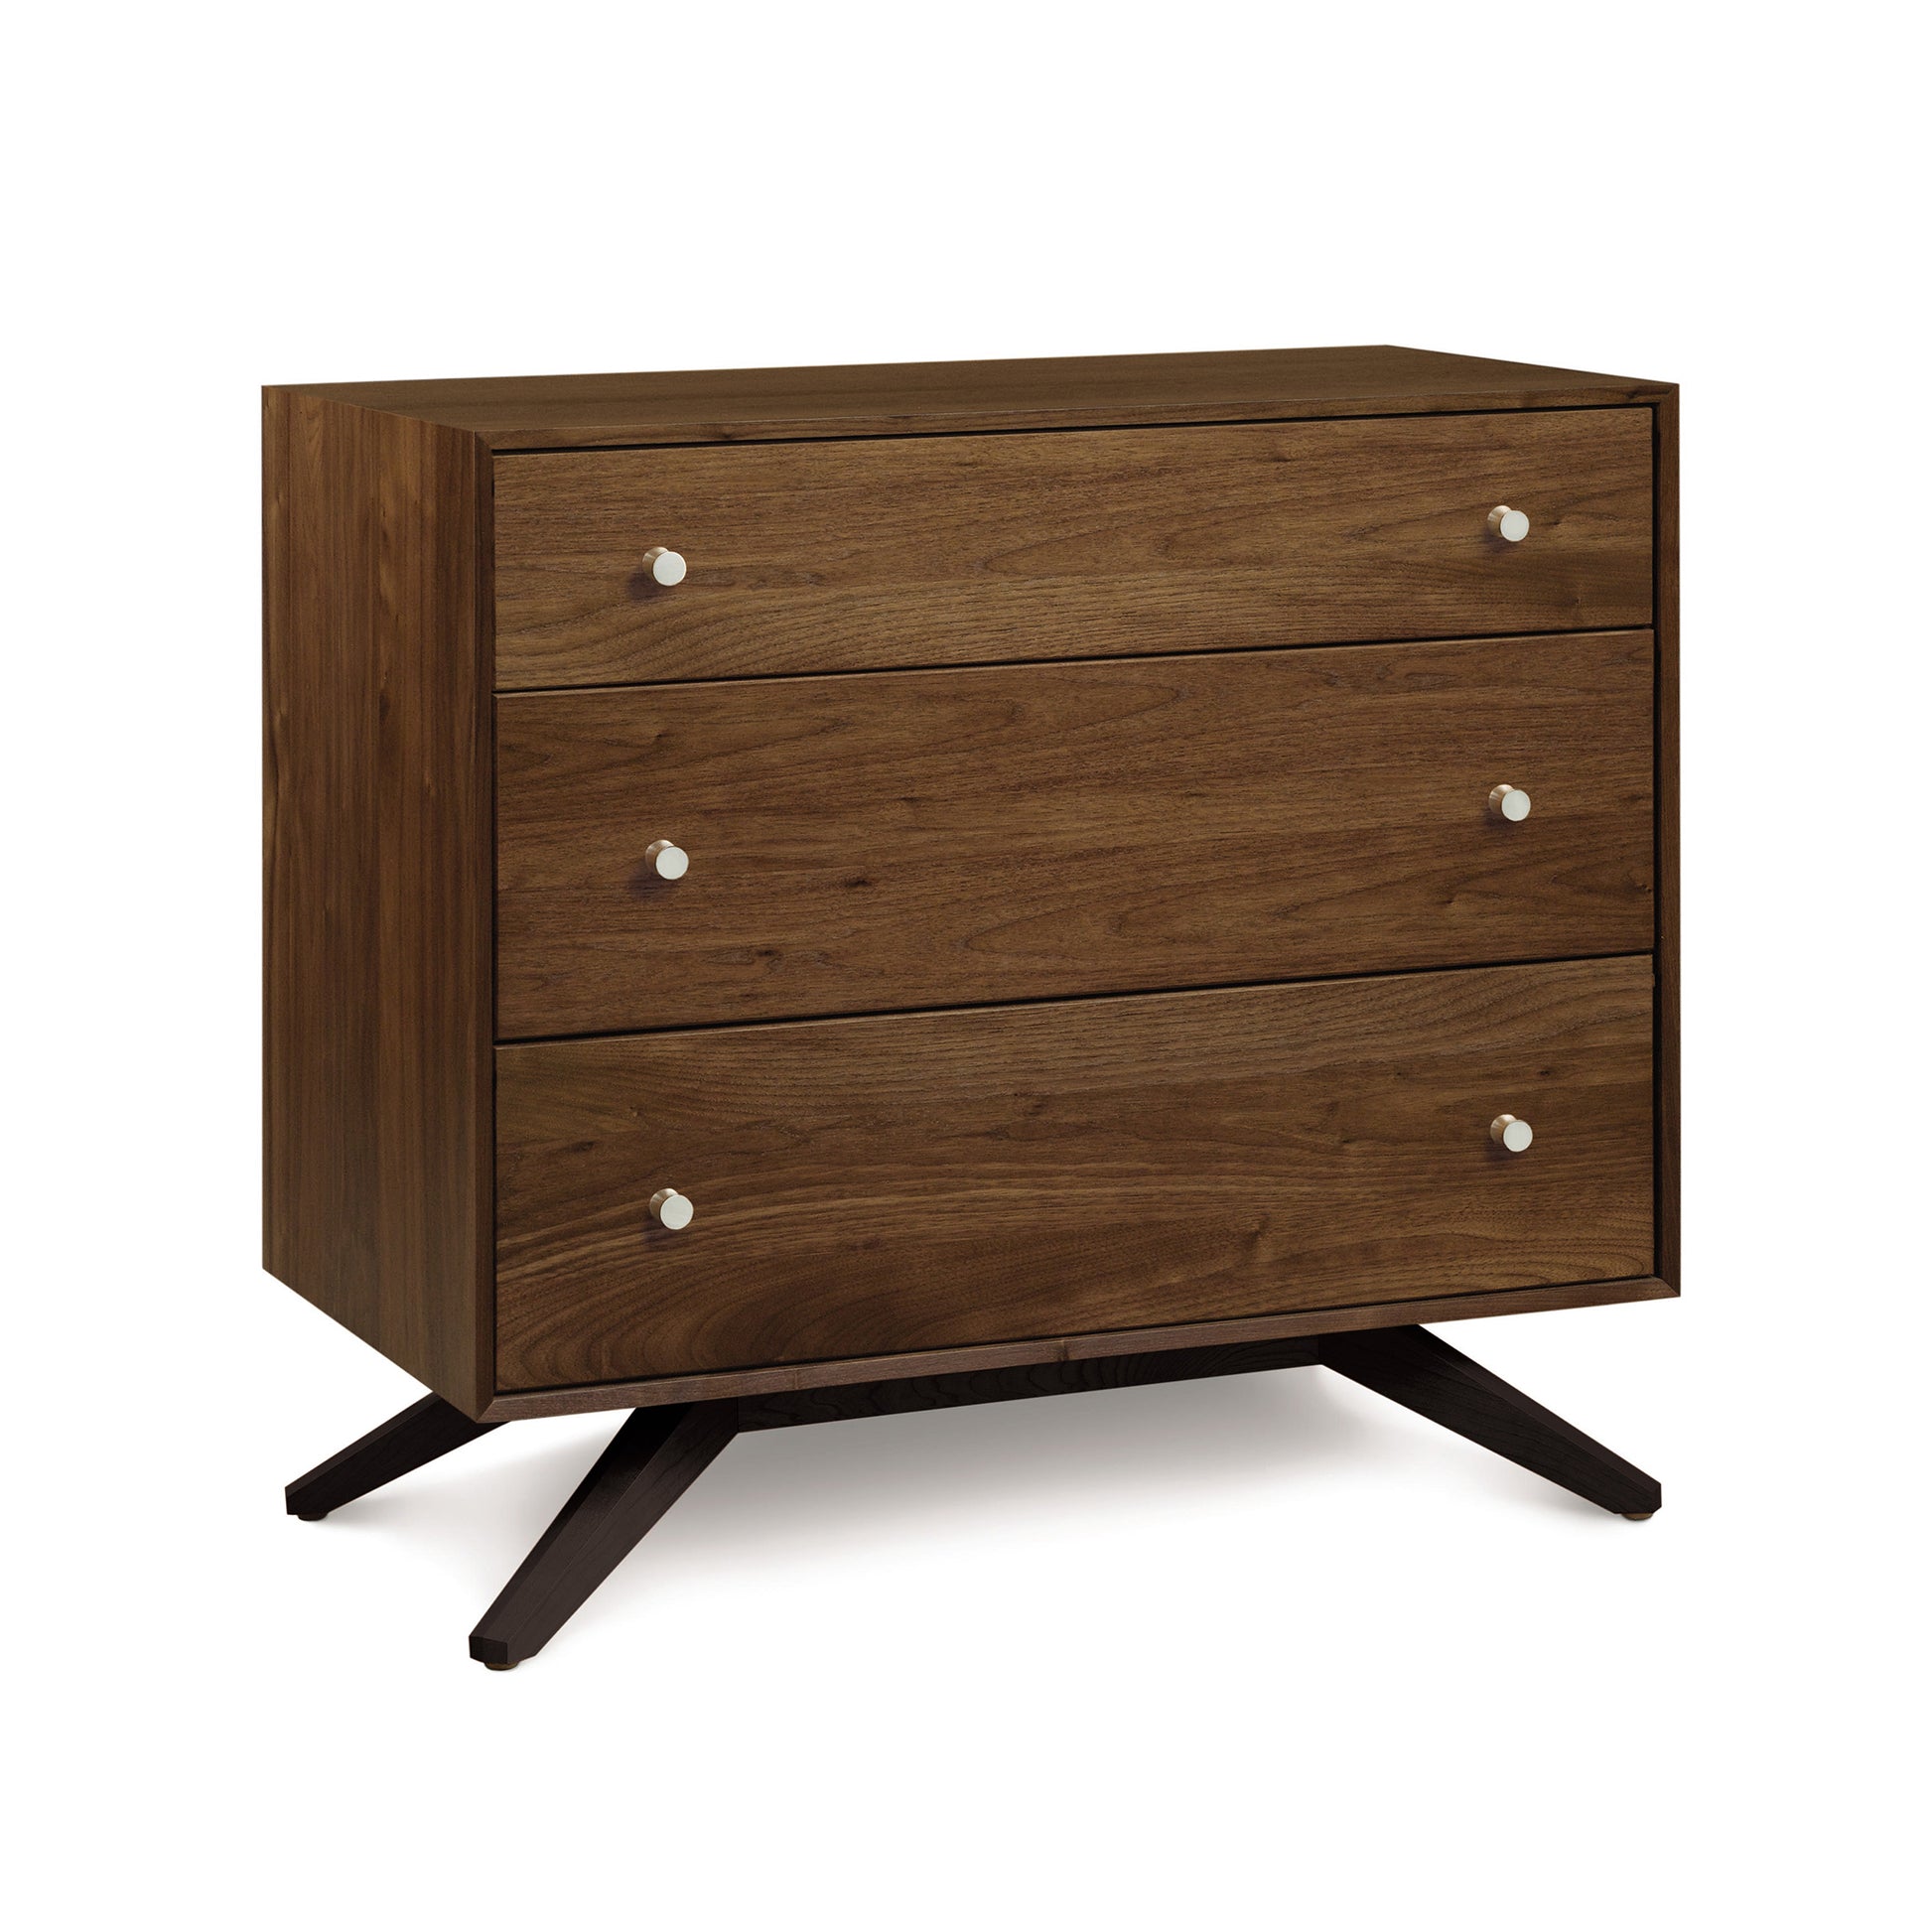 Copeland Furniture's Astrid 3-Drawer Chest with silver knobs and angled legs, featuring a Mid Century Modern design on a white background.